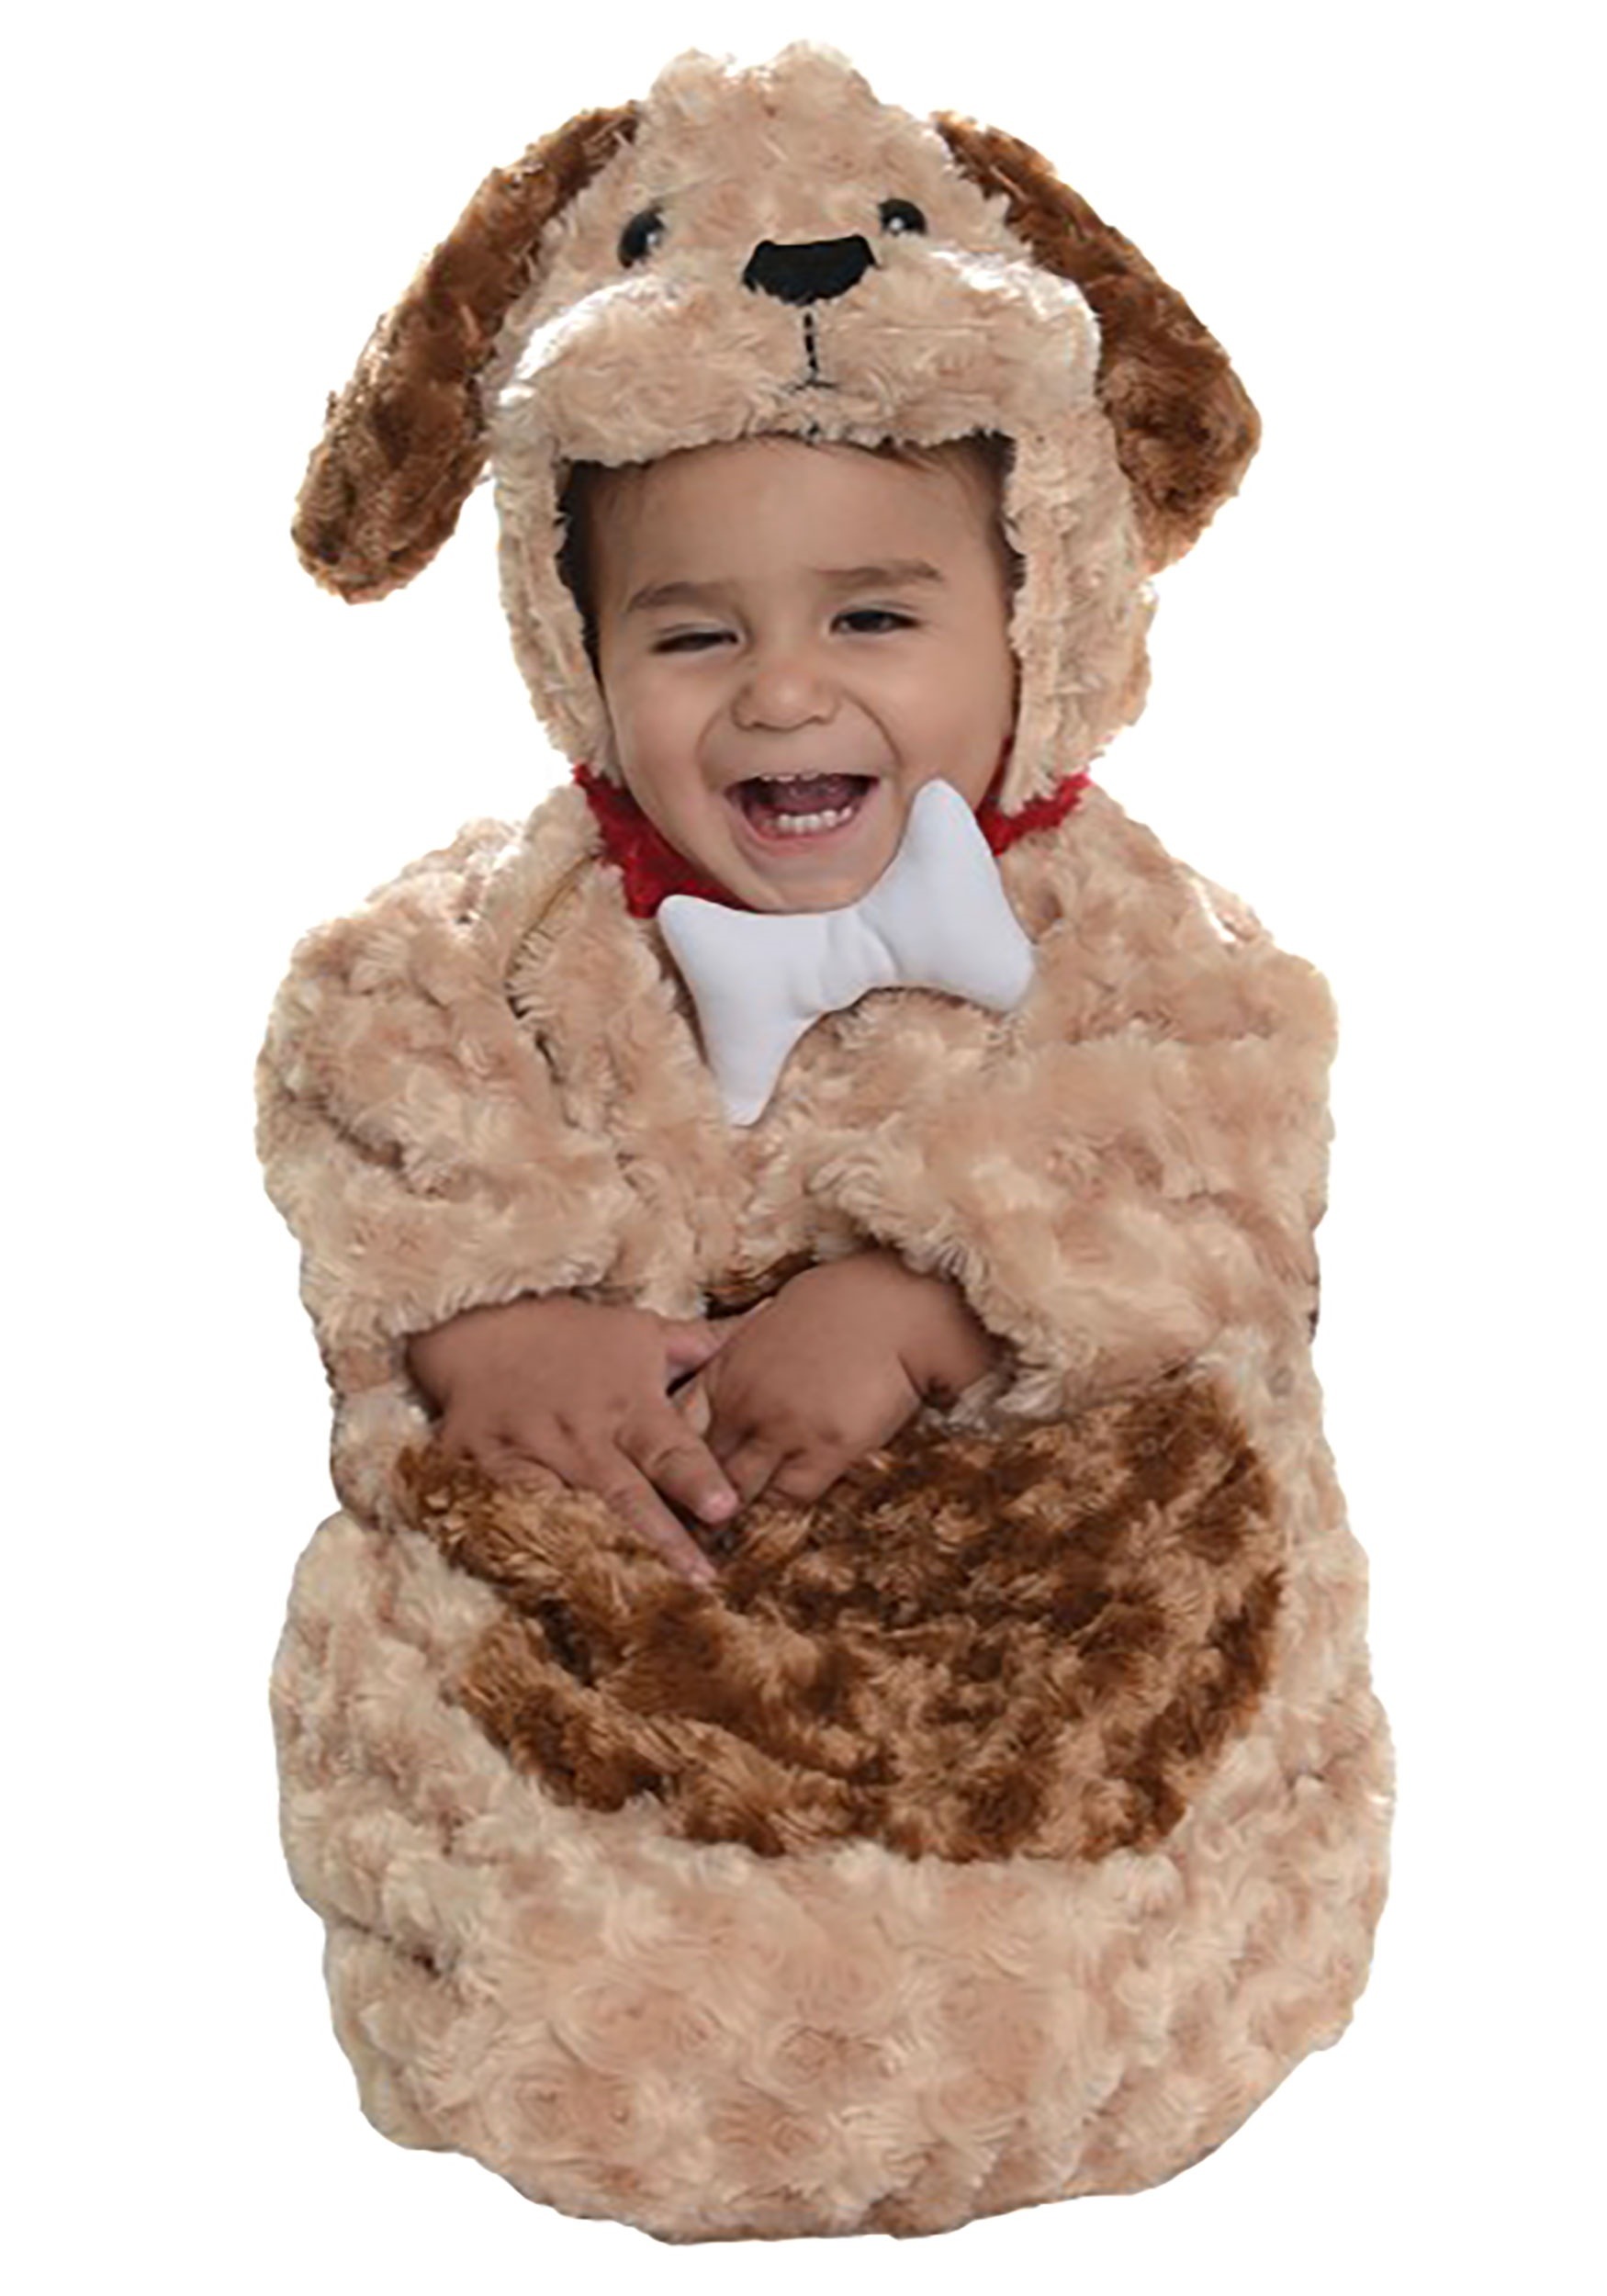 Infant Puppy Bunting Costume